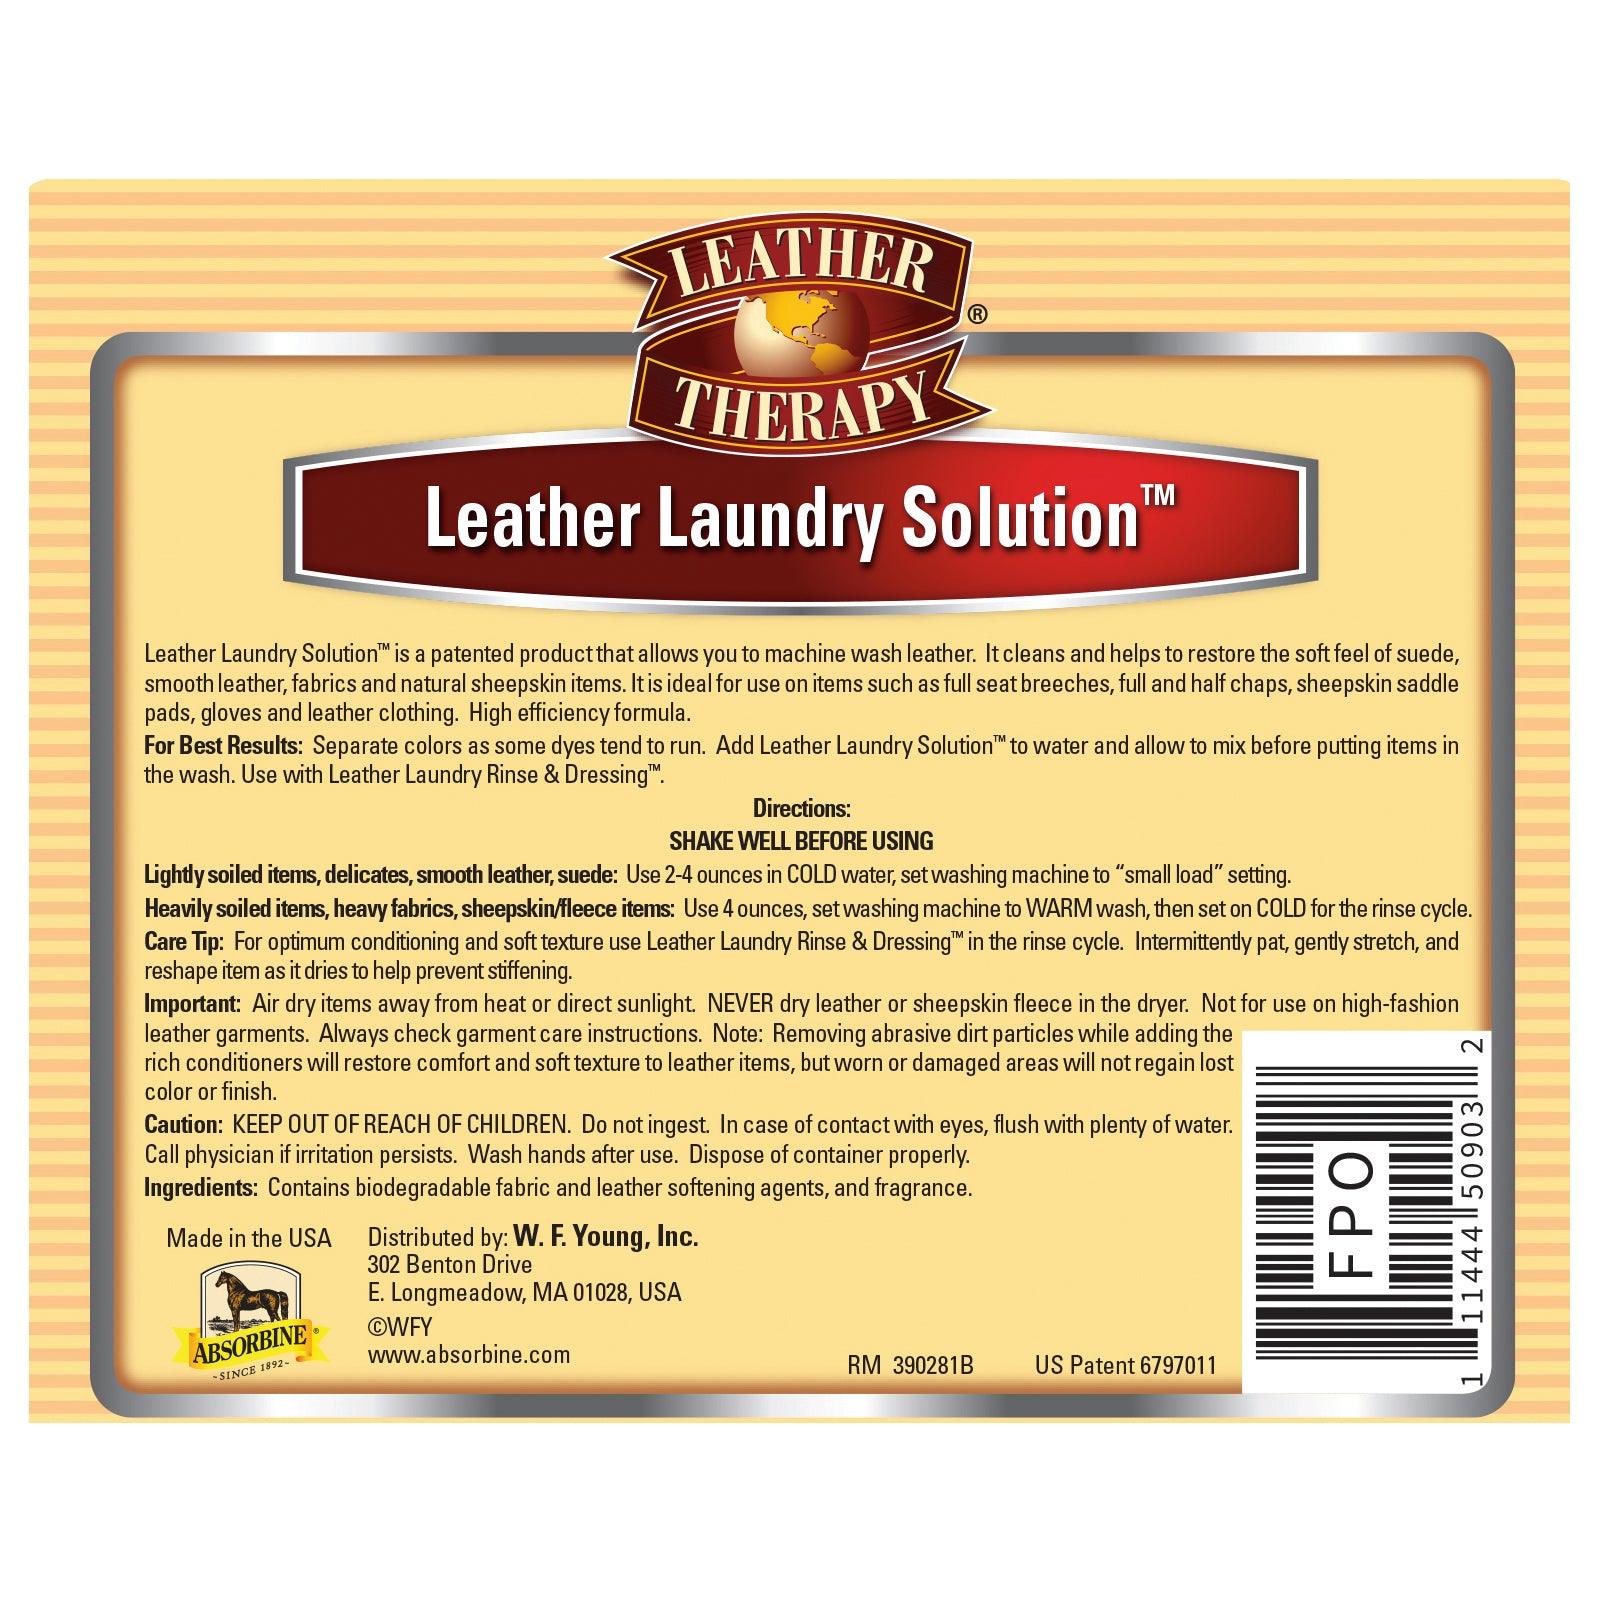 Leather Therapy Leather Laundry Solution back label to bottle.